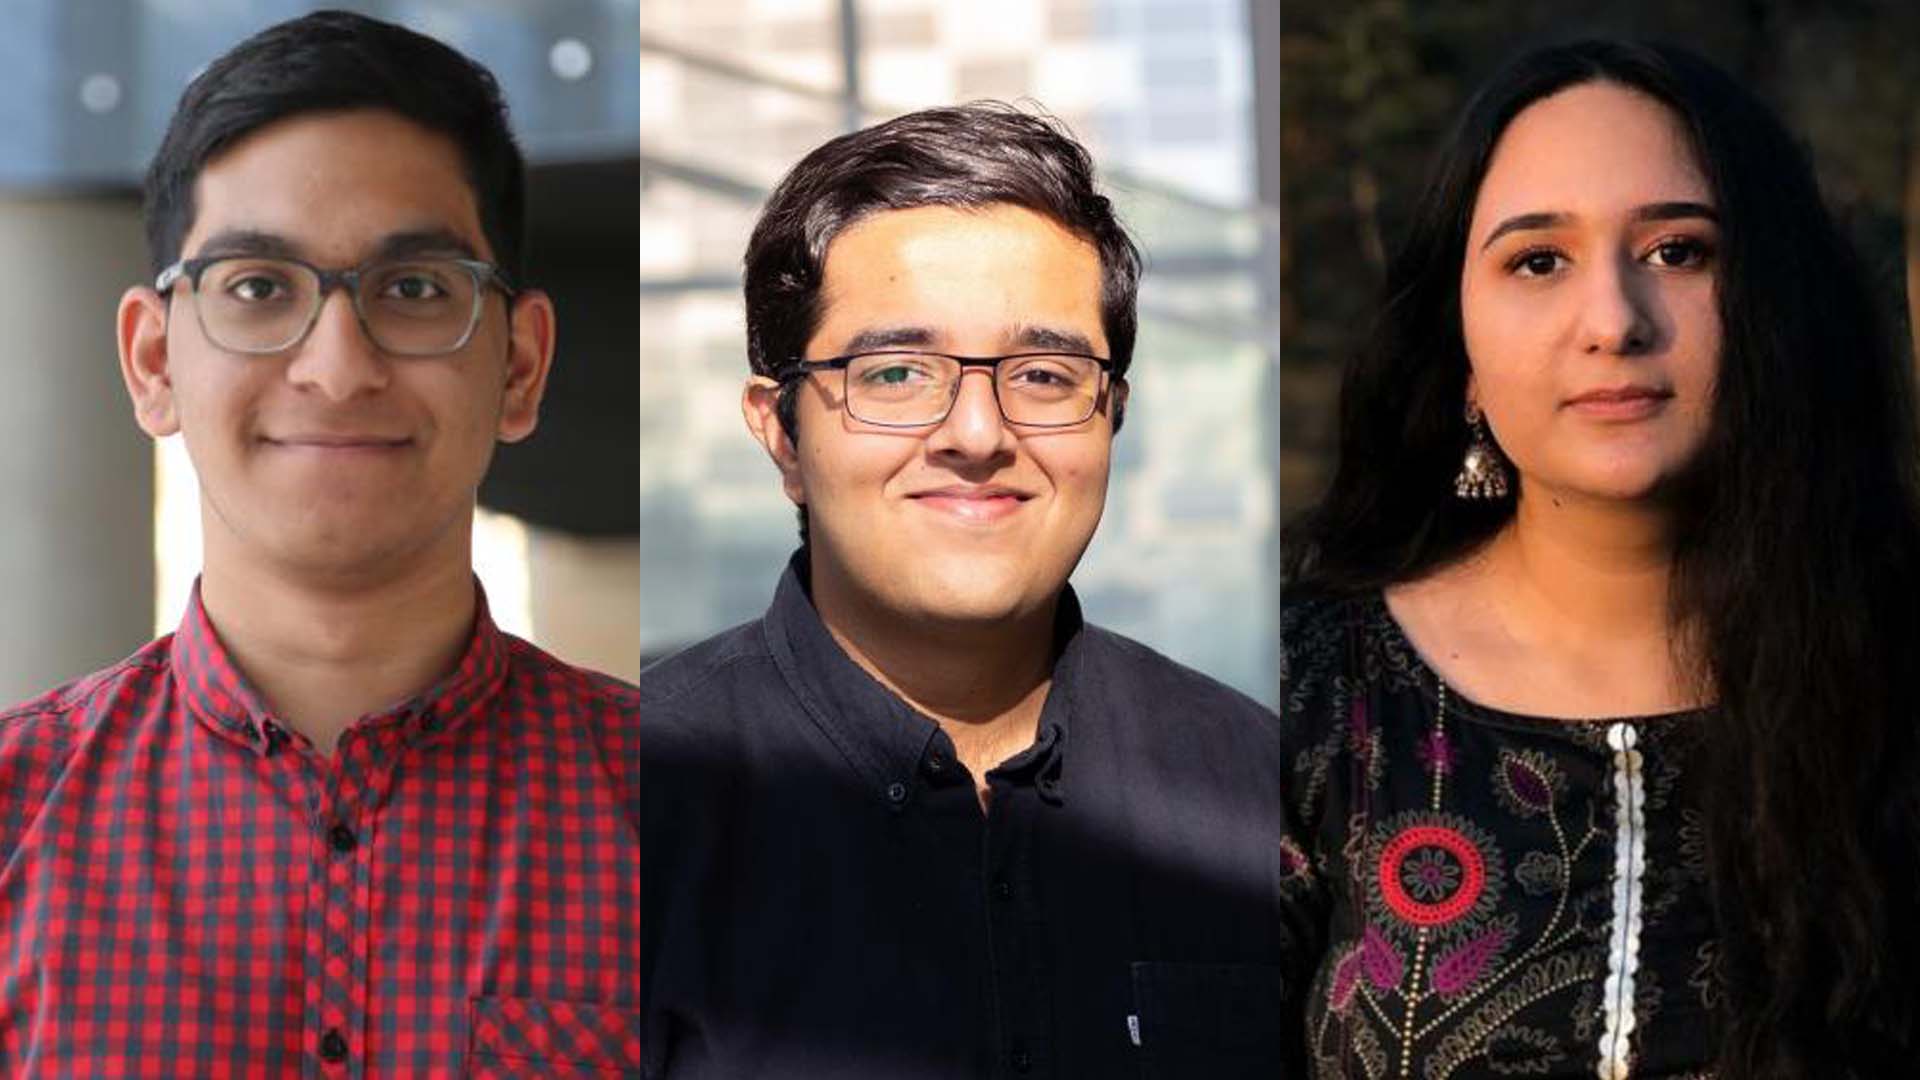 Journalism seniors Abdul Rahman Abid (left), Adan Ali (center), and Iffah Abid Kitchlew make up the team that will travel to Pakistan to report on the lack of a public waste management system.